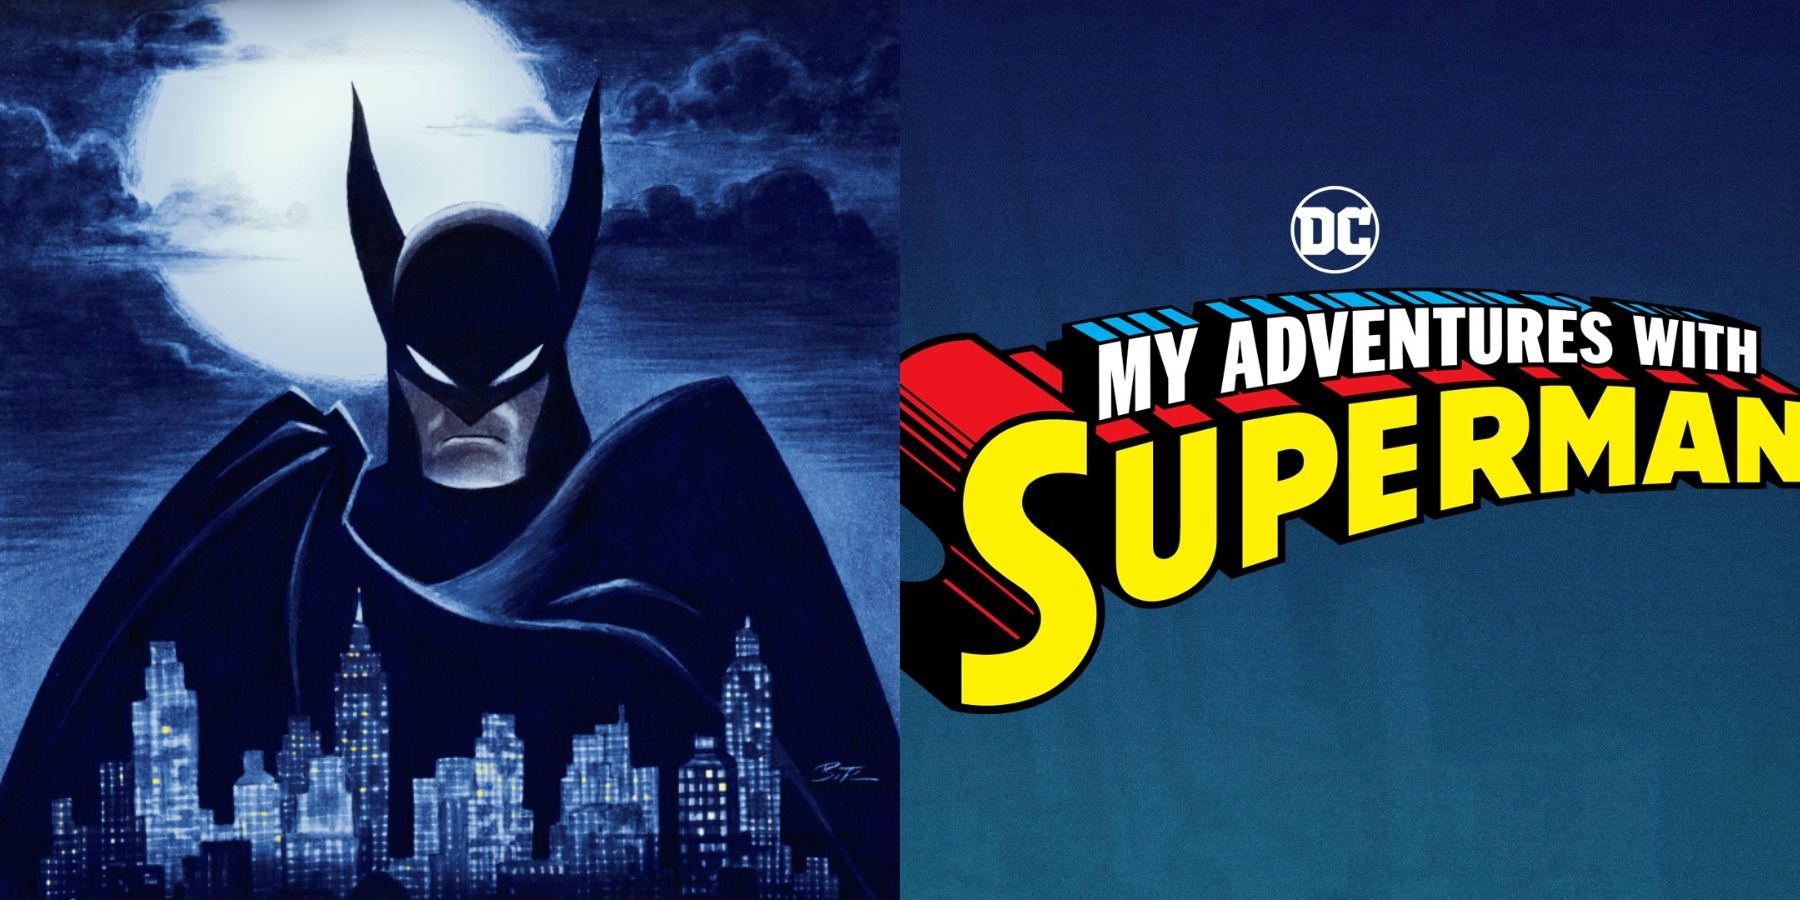 Batman: Caped Crusader poster and the logo for My Adventures With Superman